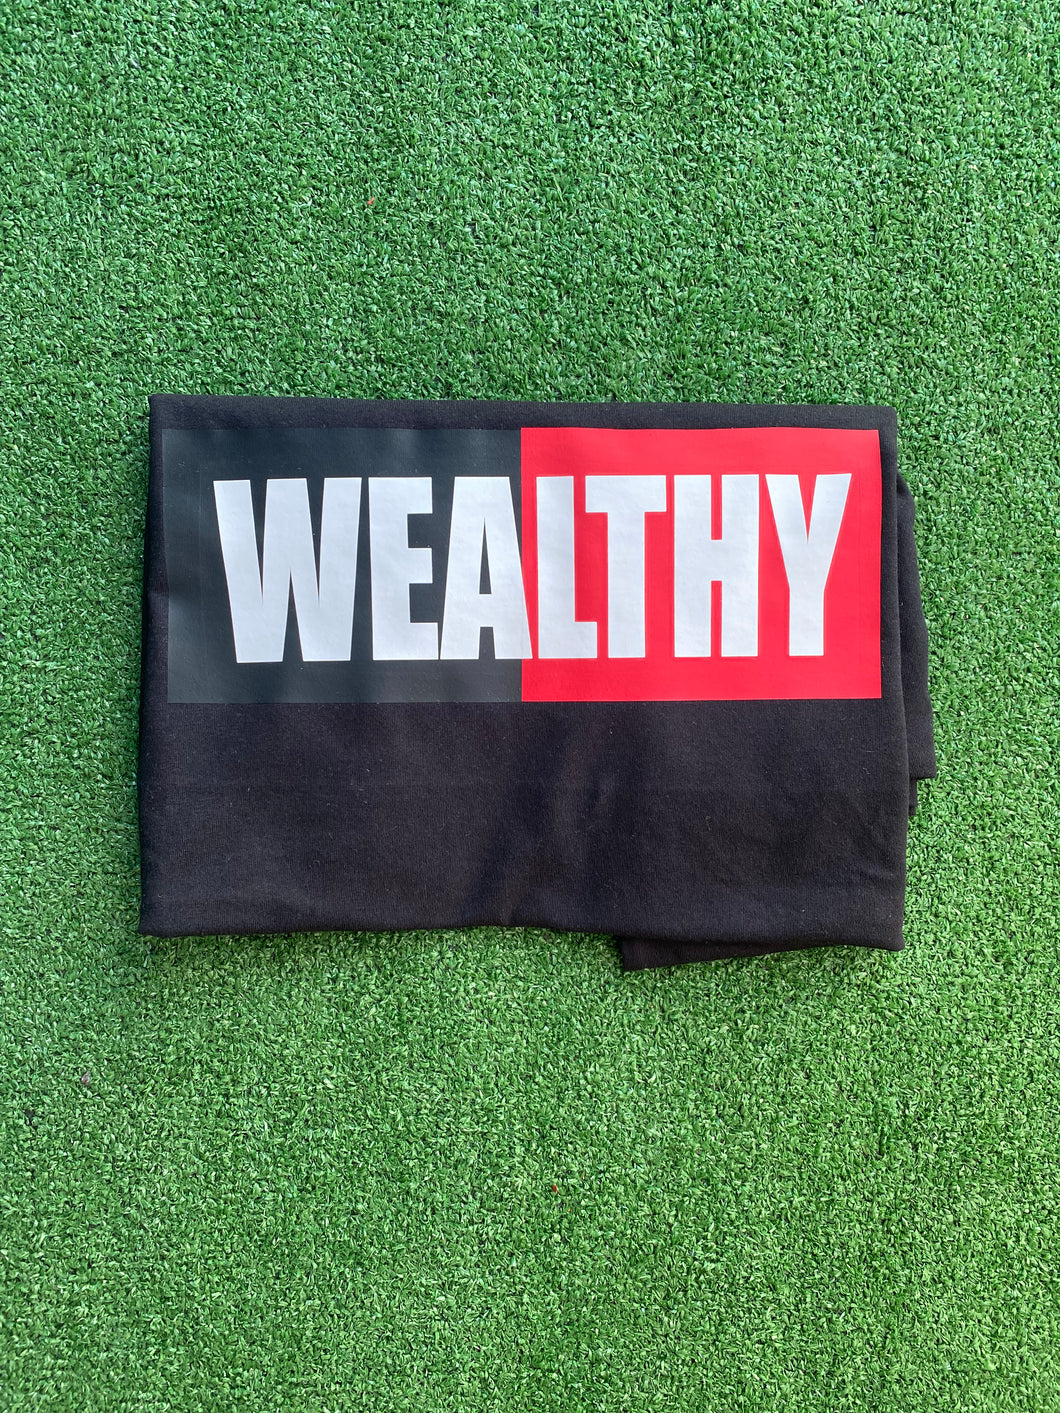 Wealthy Tee (Black/Red/White)